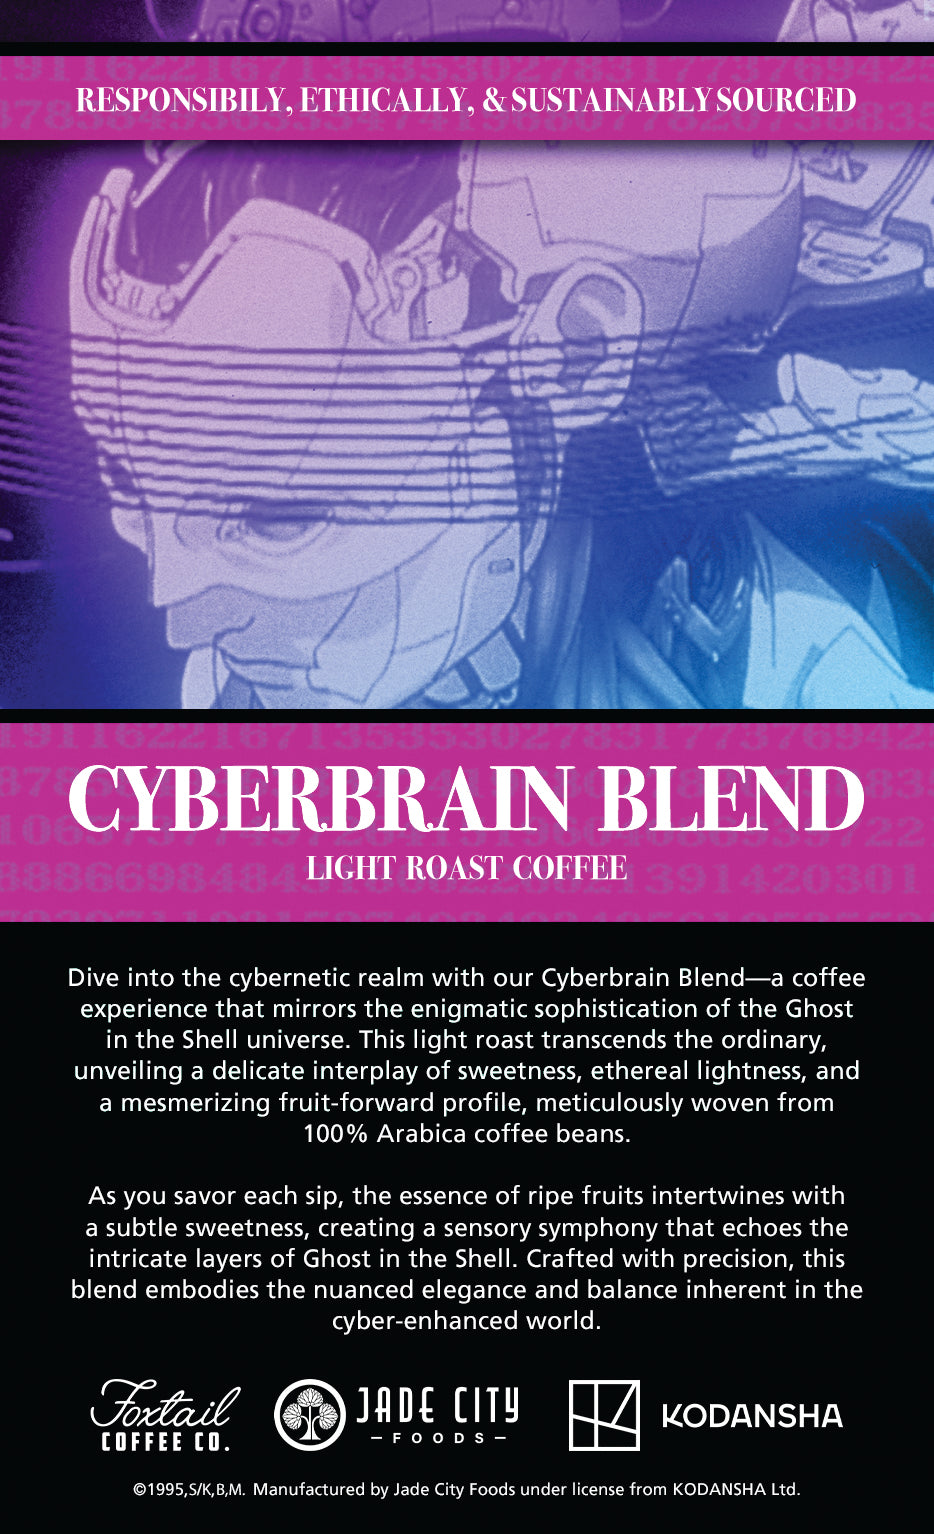 Ghost in the Shell Coffee 3-Pack